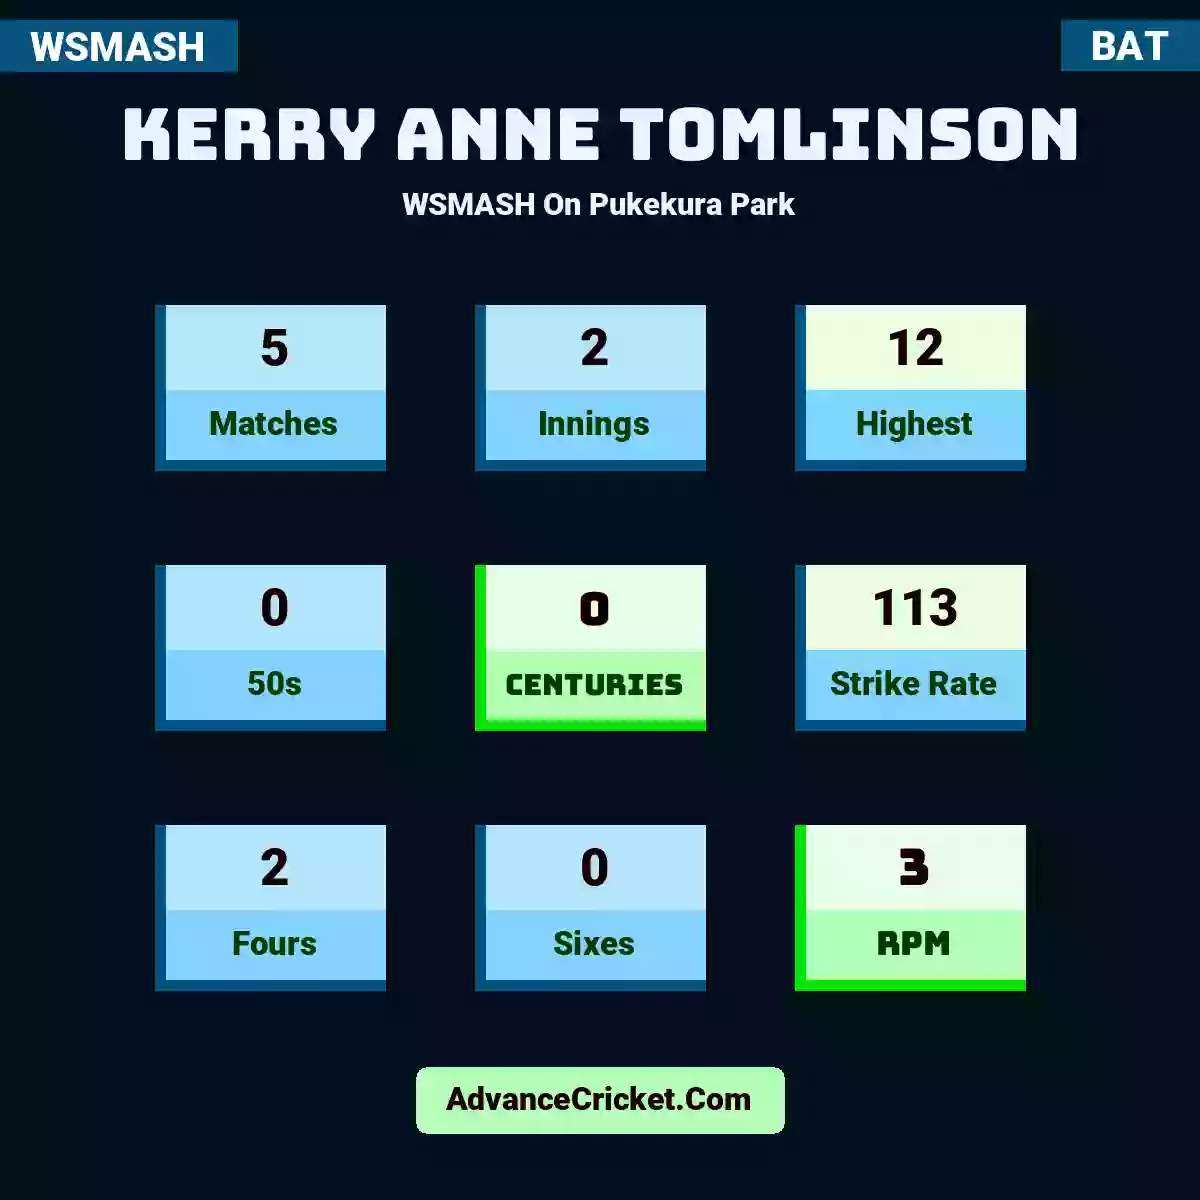 Kerry Anne Tomlinson WSMASH  On Pukekura Park, Kerry Anne Tomlinson played 5 matches, scored 12 runs as highest, 0 half-centuries, and 0 centuries, with a strike rate of 113. KA.Tomlinson hit 2 fours and 0 sixes, with an RPM of 3.